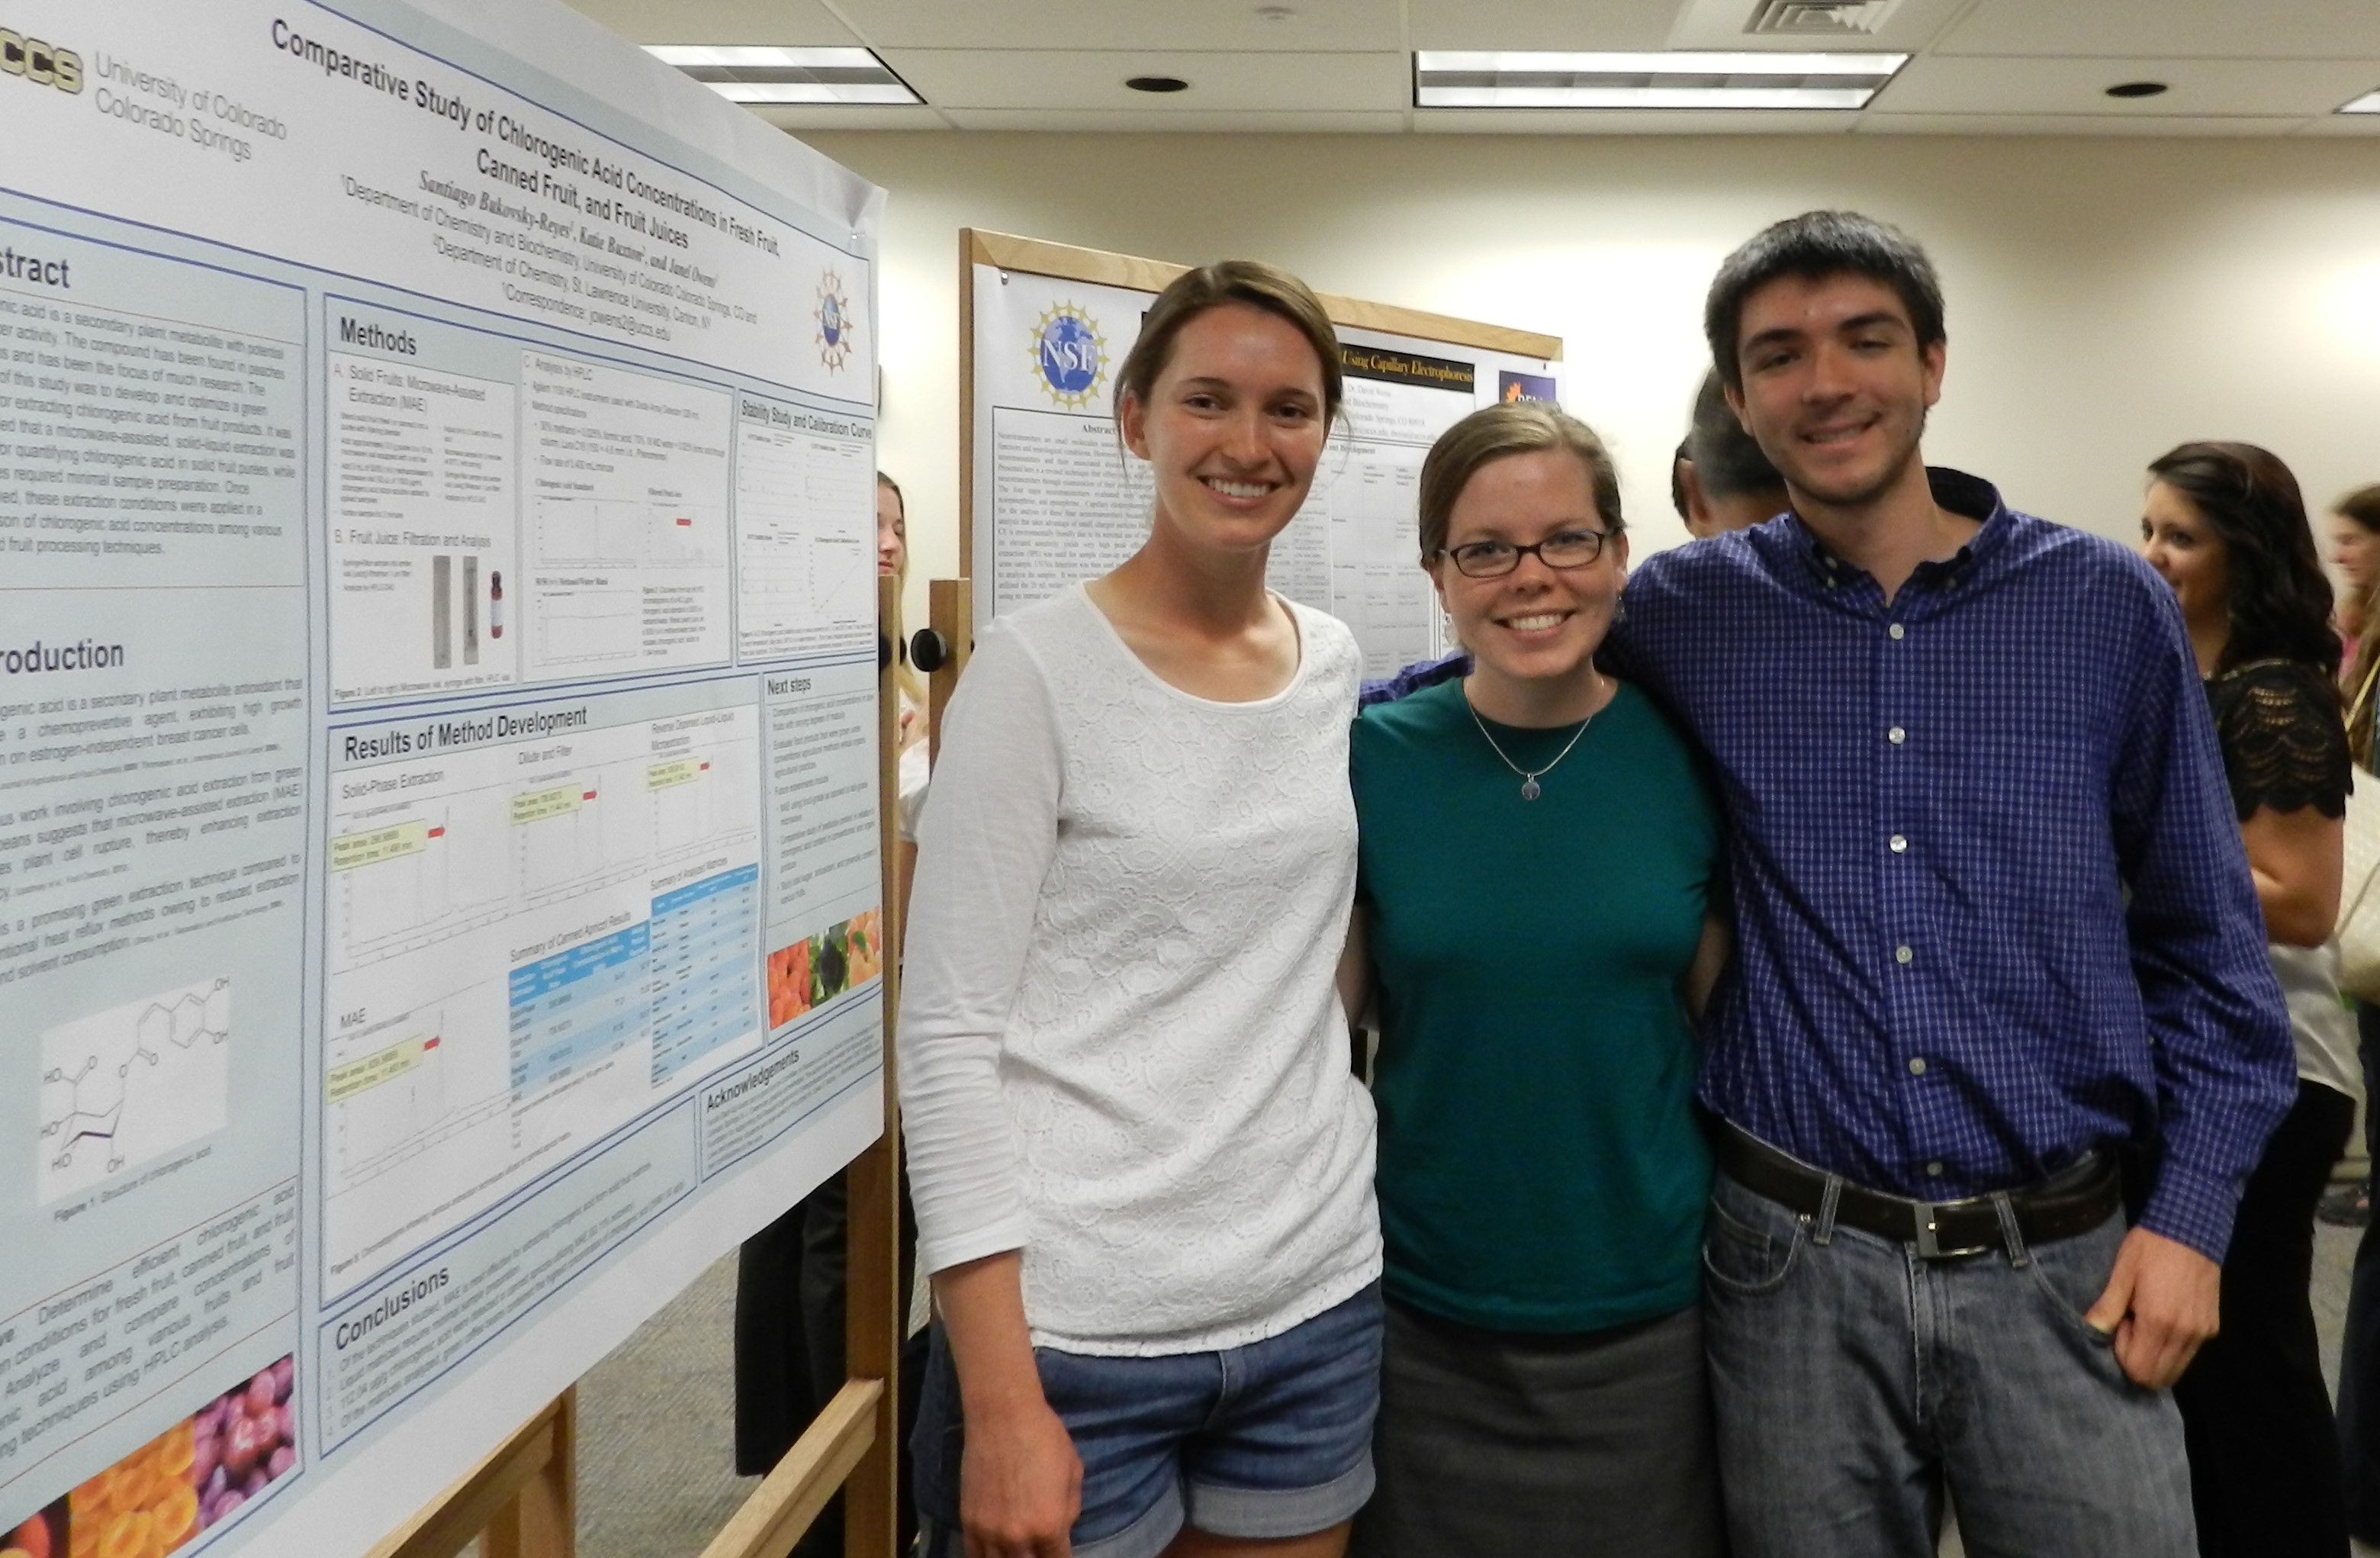 Faculty and student researchers with poster